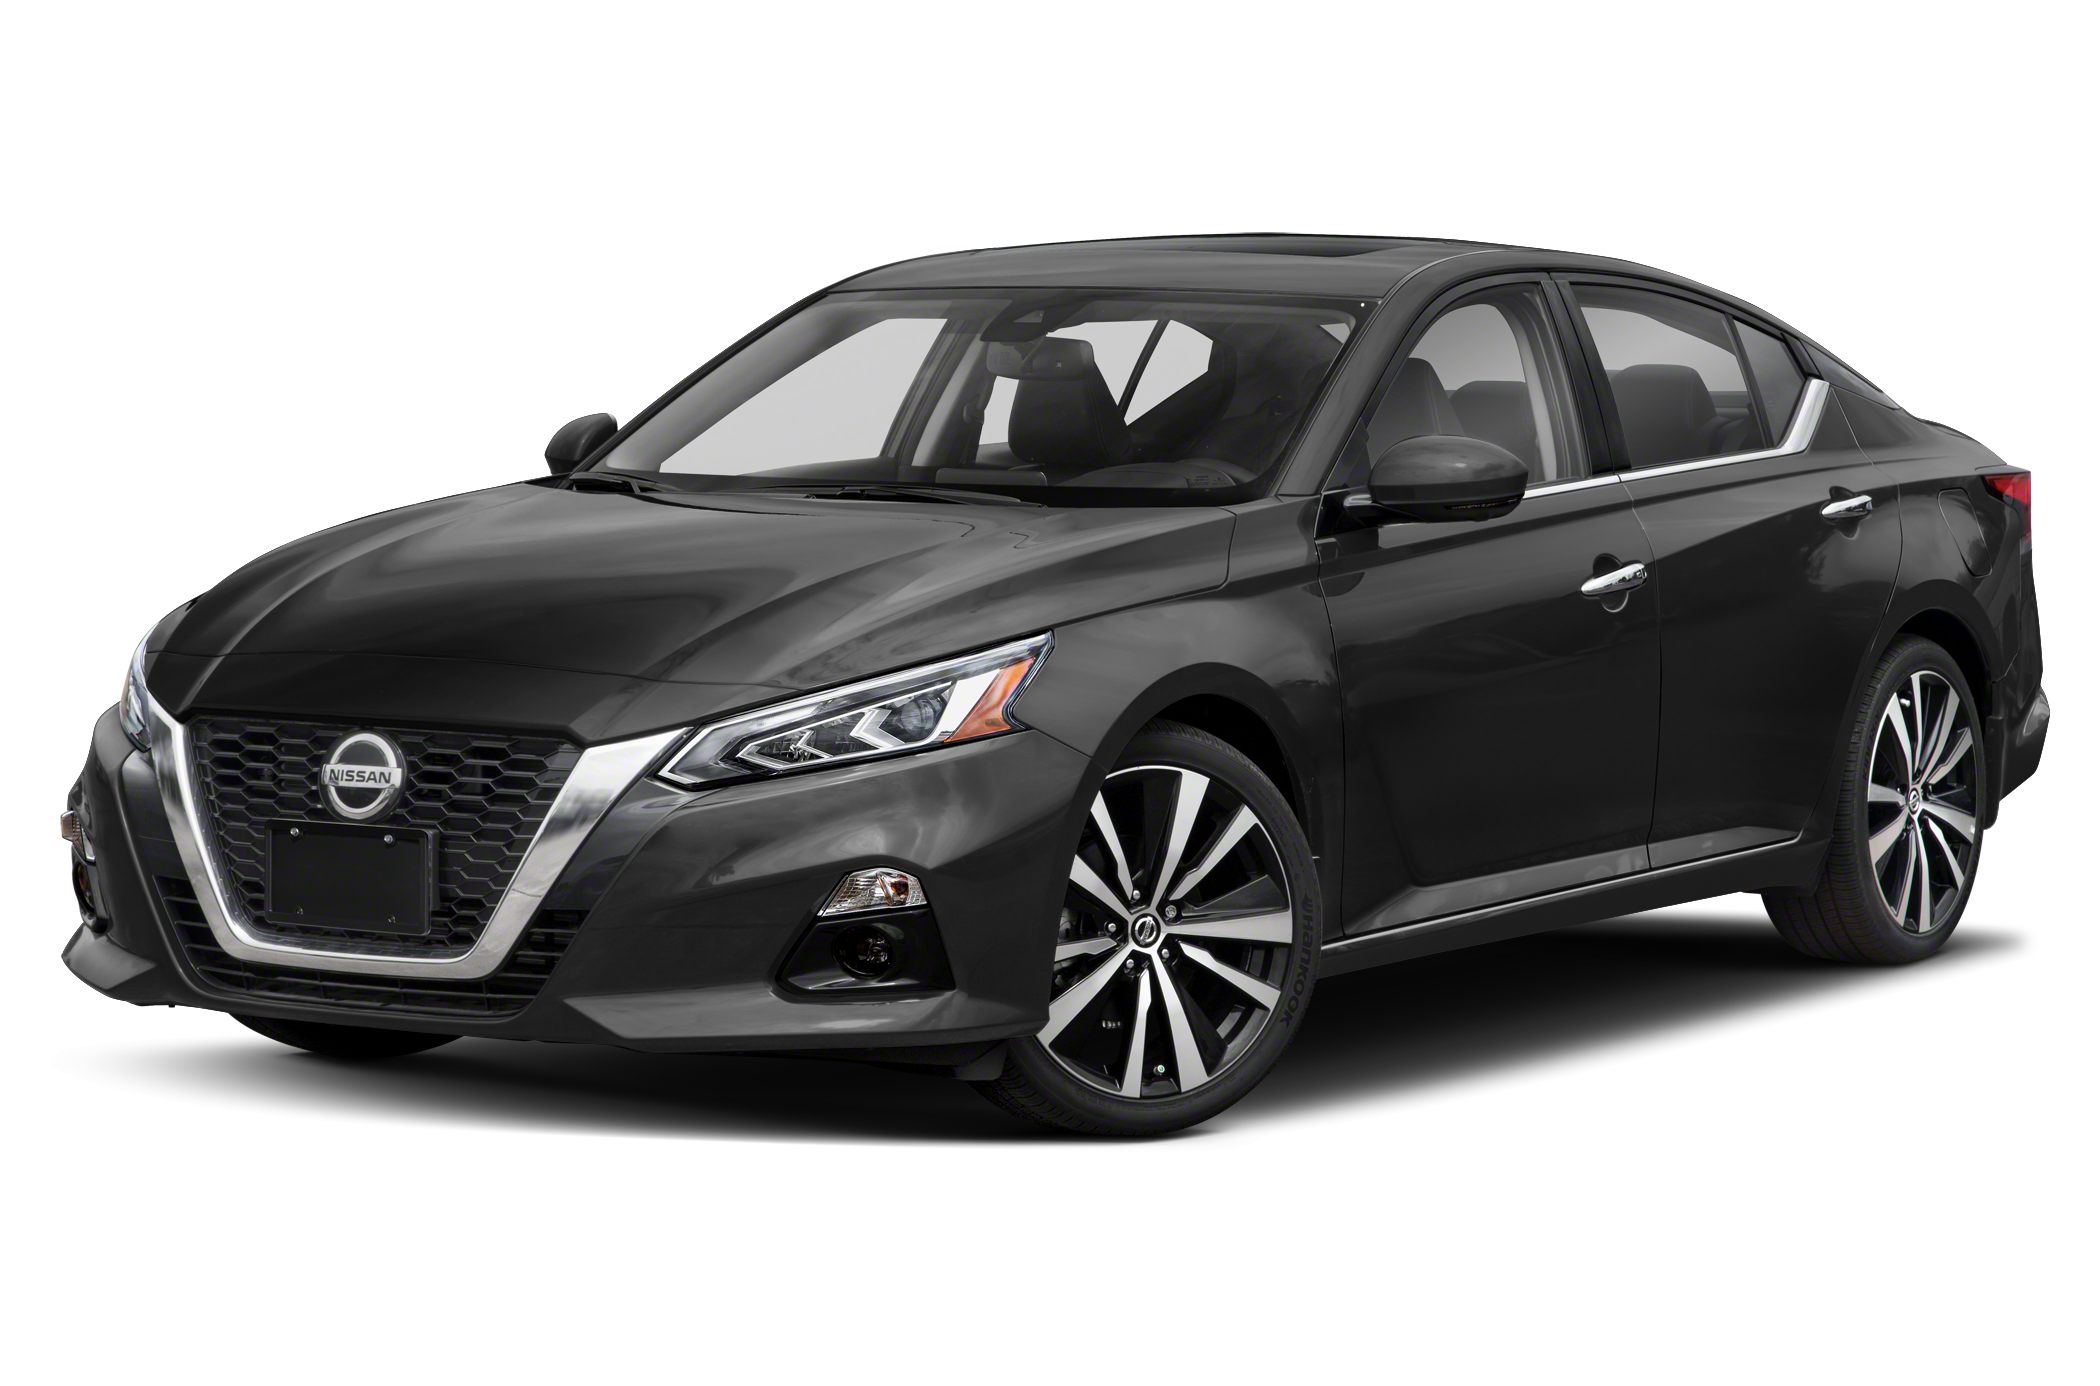 2019 Nissan Altima 2 5 Sv 4dr All Wheel Drive Sedan Pictures